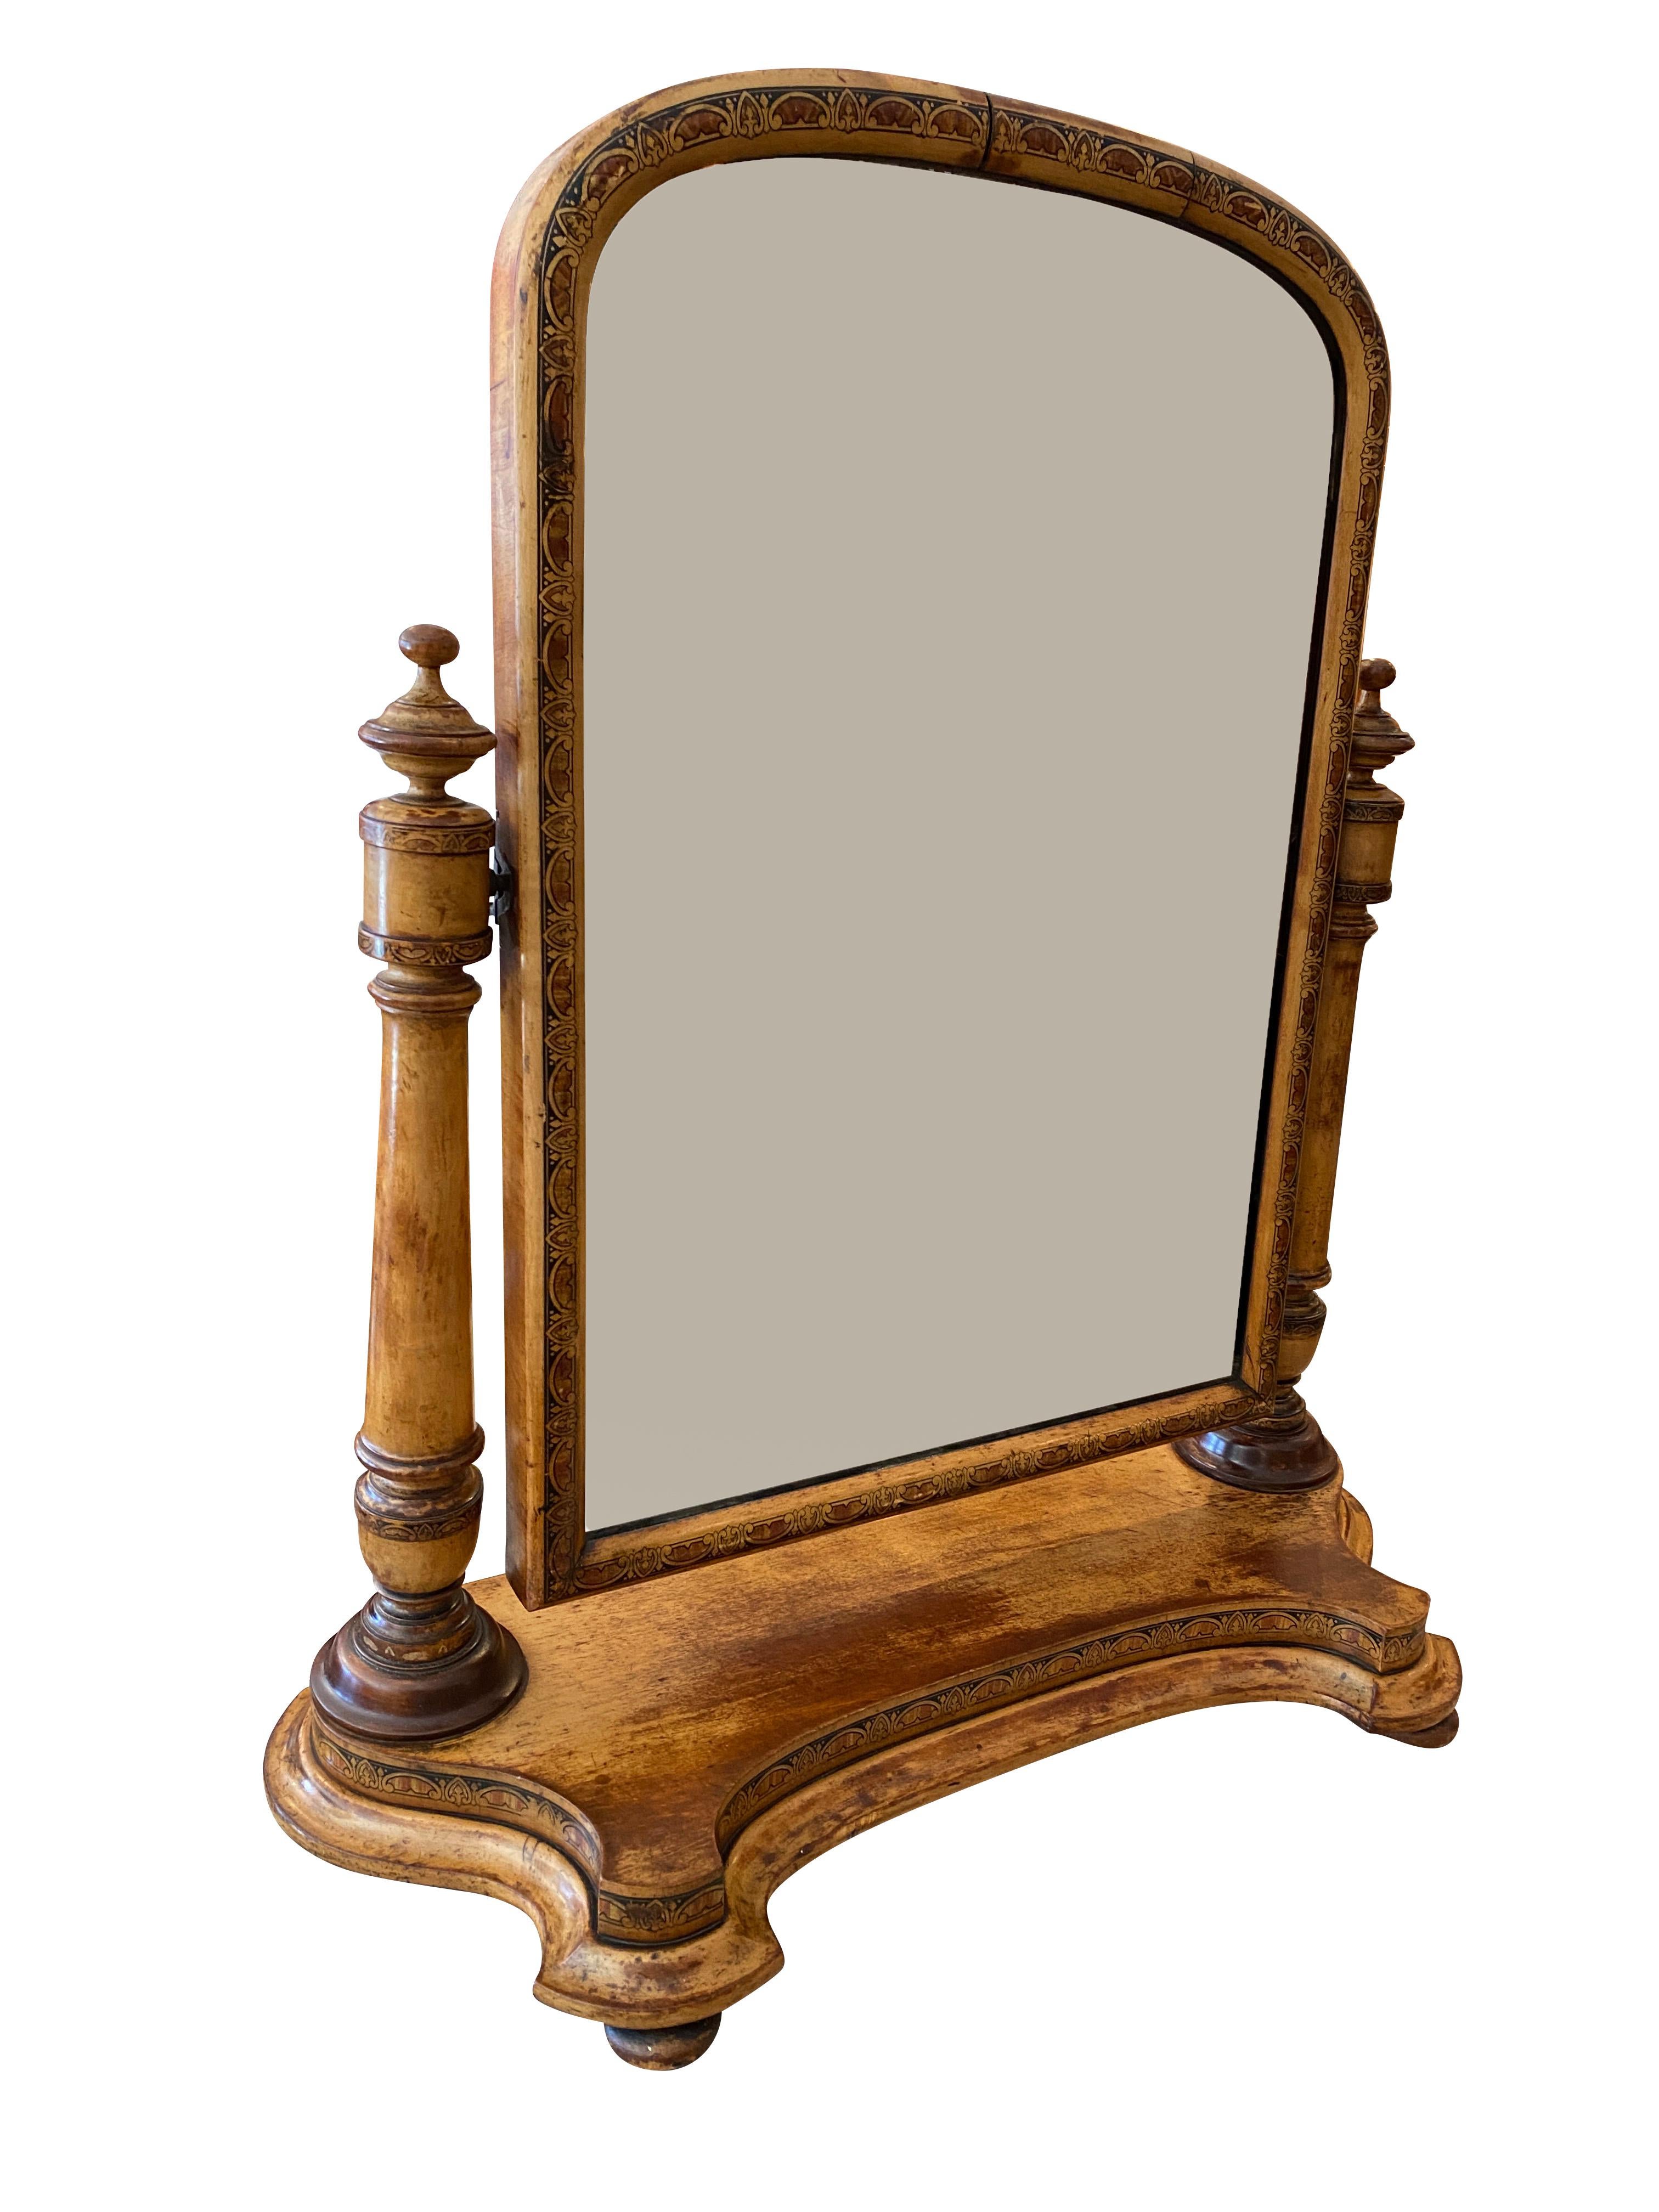 Arched mirror frame with painted decoration flanked by columns with turned finials, shaped platform base. Flat bun feet.